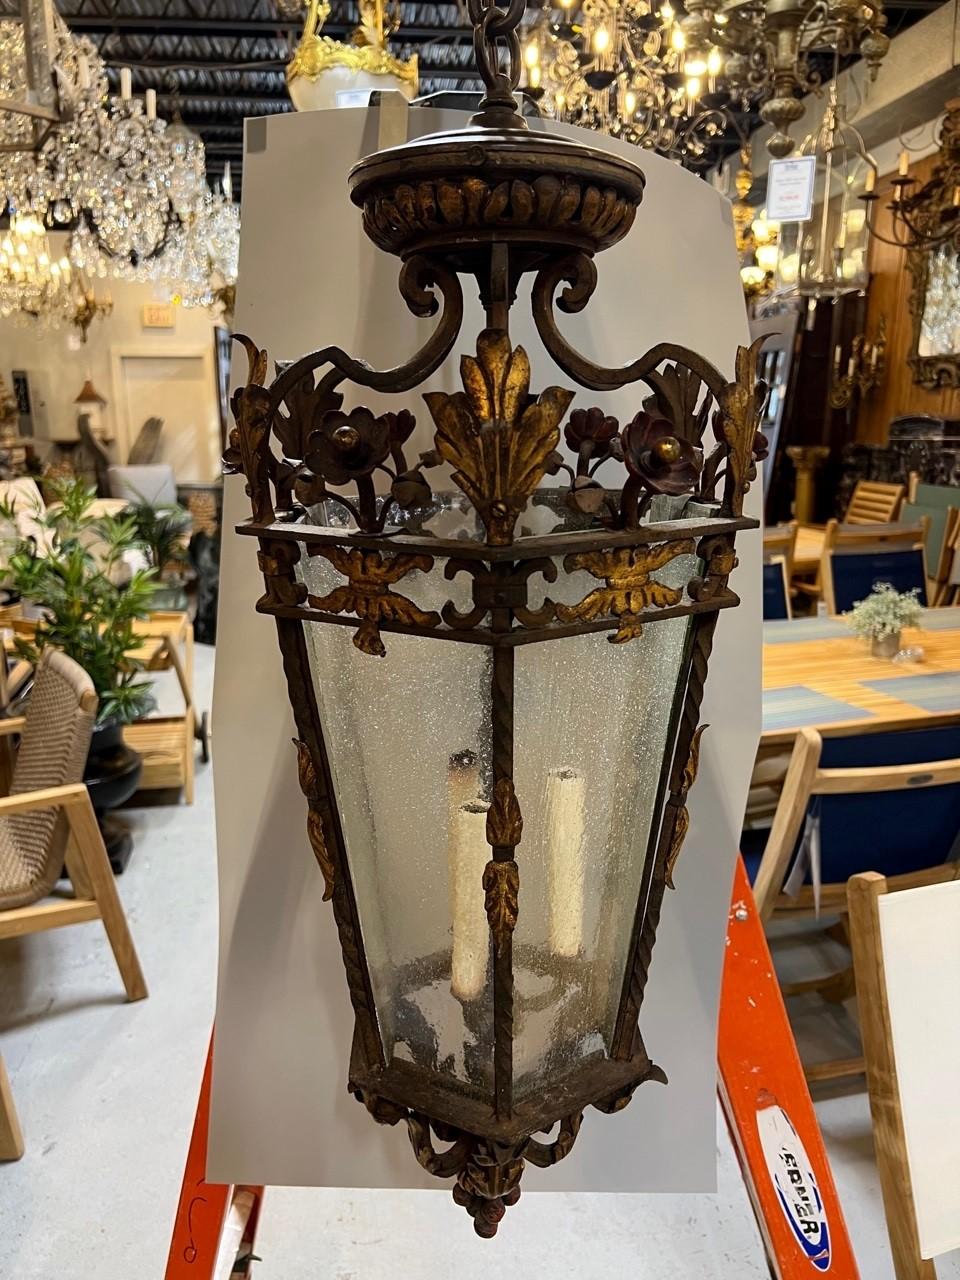 Amazing decorative iron lantern chandelier with six bubble glass panels, acanthus leaves and flowers. The gold paint on the acanthus leaves and all the decorative details looks great. The lantern comes with a ceiling cap and 45